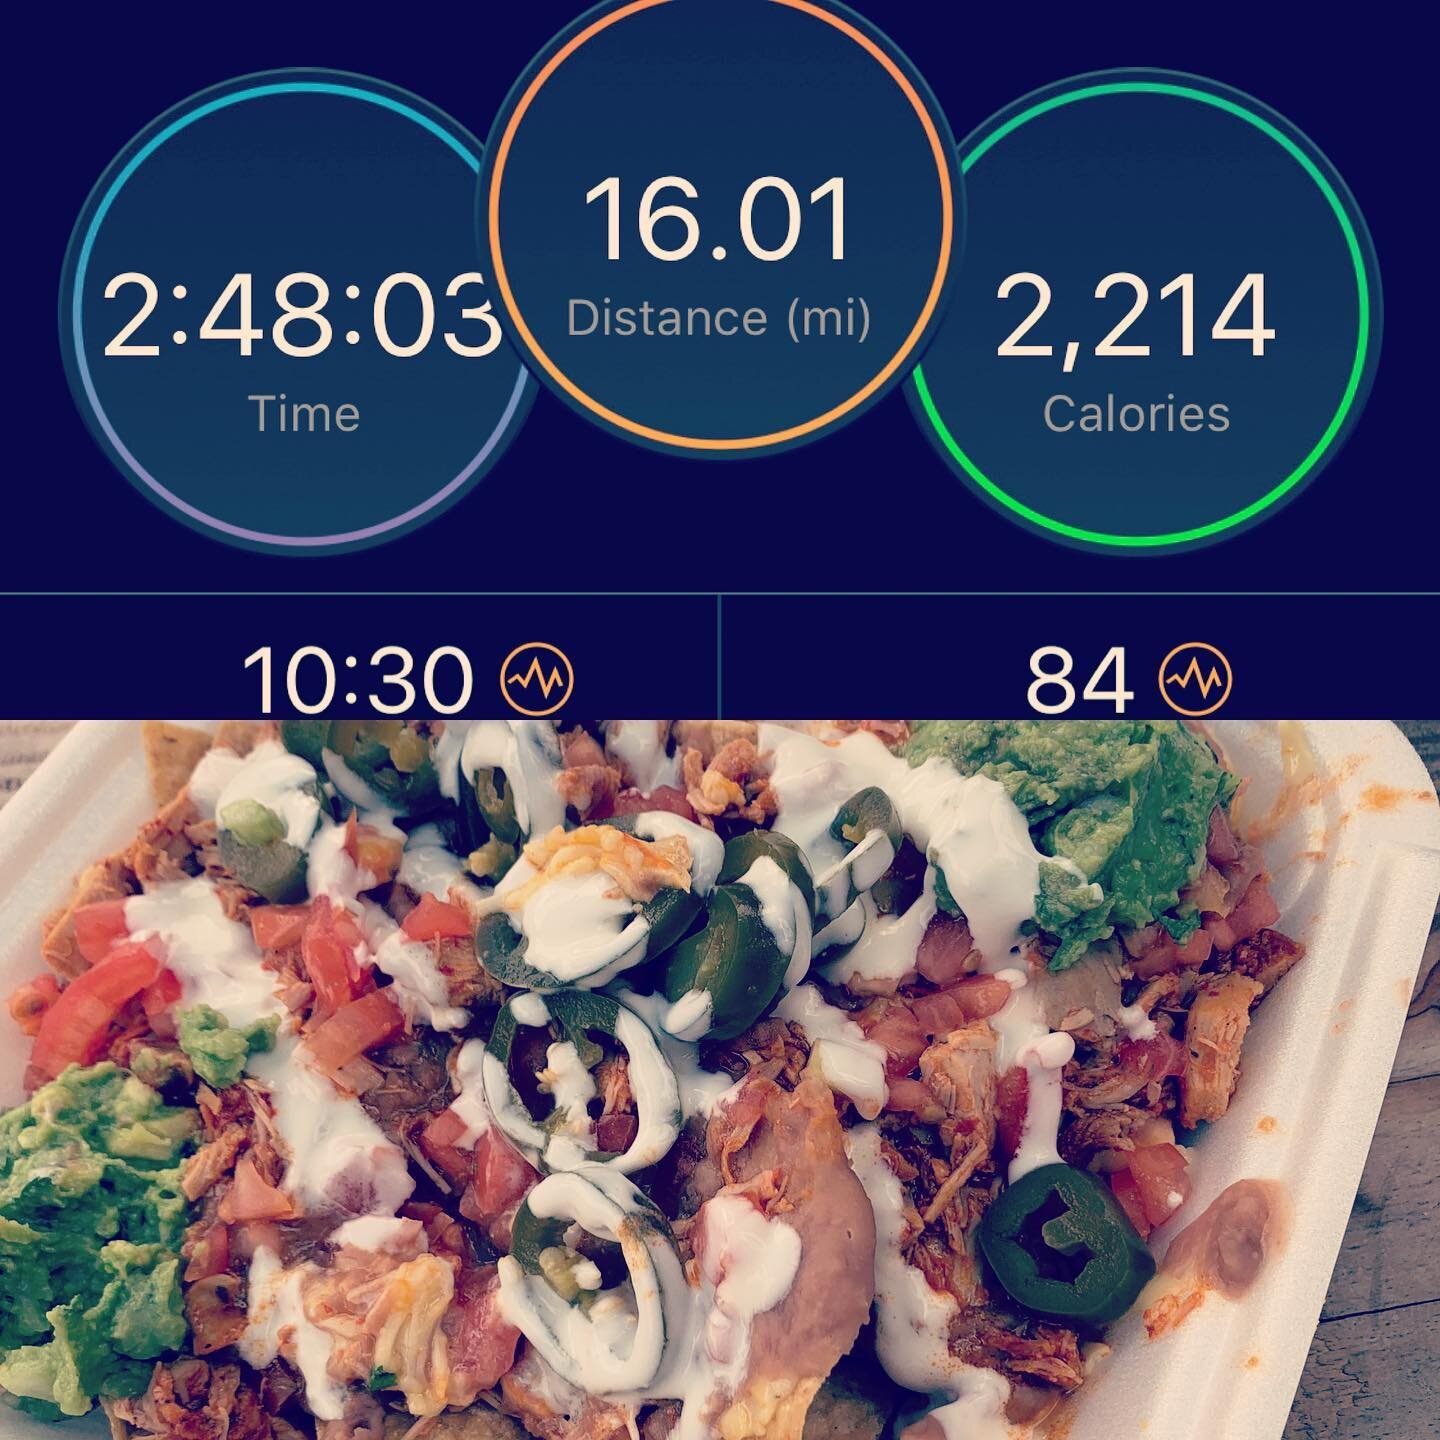 16 miler this week. And what do you finally eat for lunch after you run your longest distance ever? Chicken f&rsquo;ing nachos! Thanks for the @chimarathon training @chicagoendurancesports #mychicagomarathon #runthechi #running #ilovestats #keeponkee